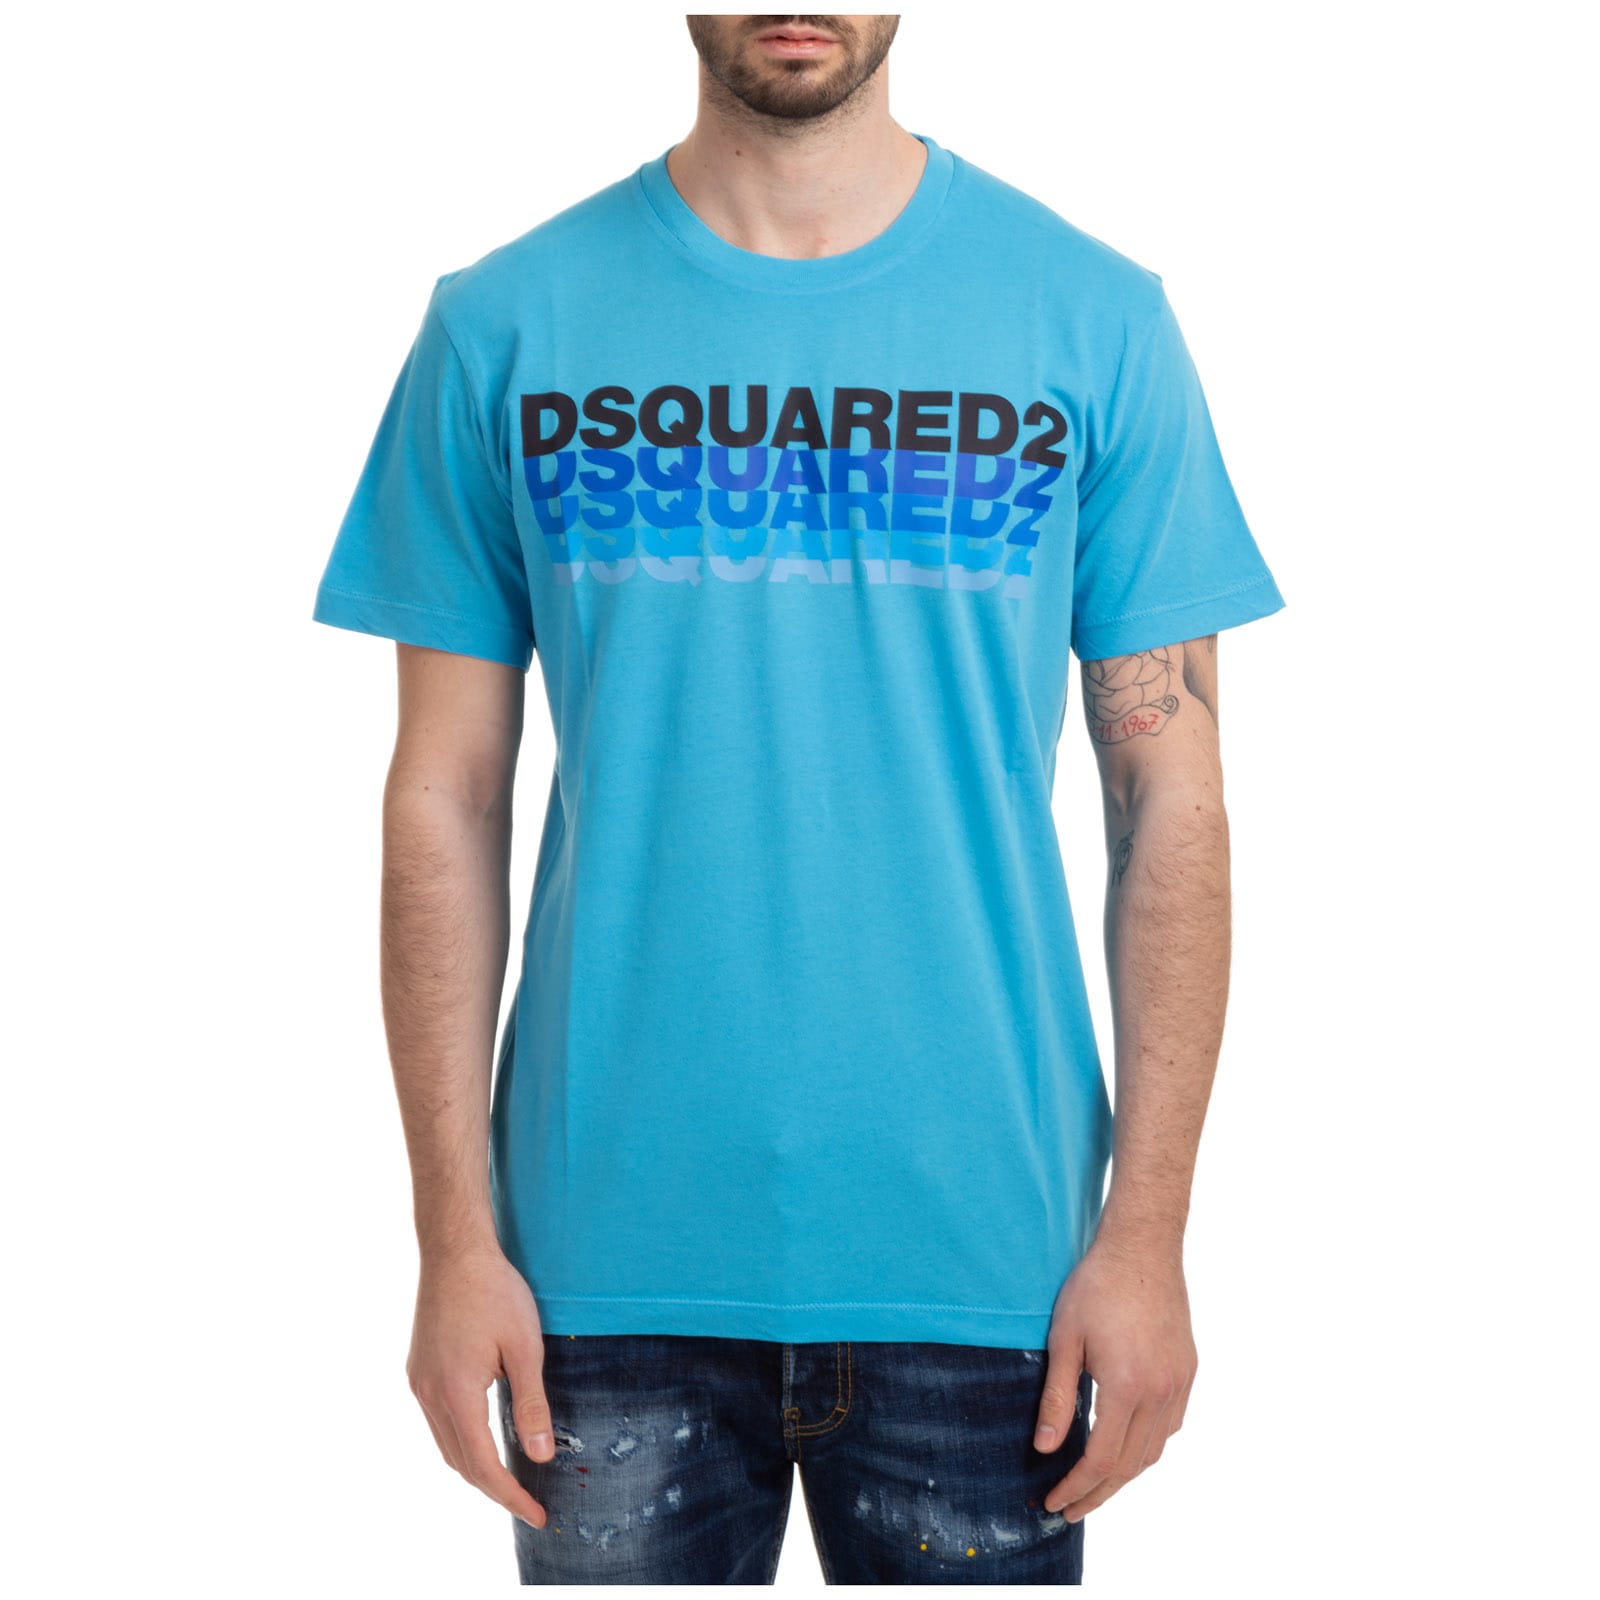 DSQUARED2 DSQUARED2 OMBRE LOGO T-SHIRT,S74GD0836S21600481